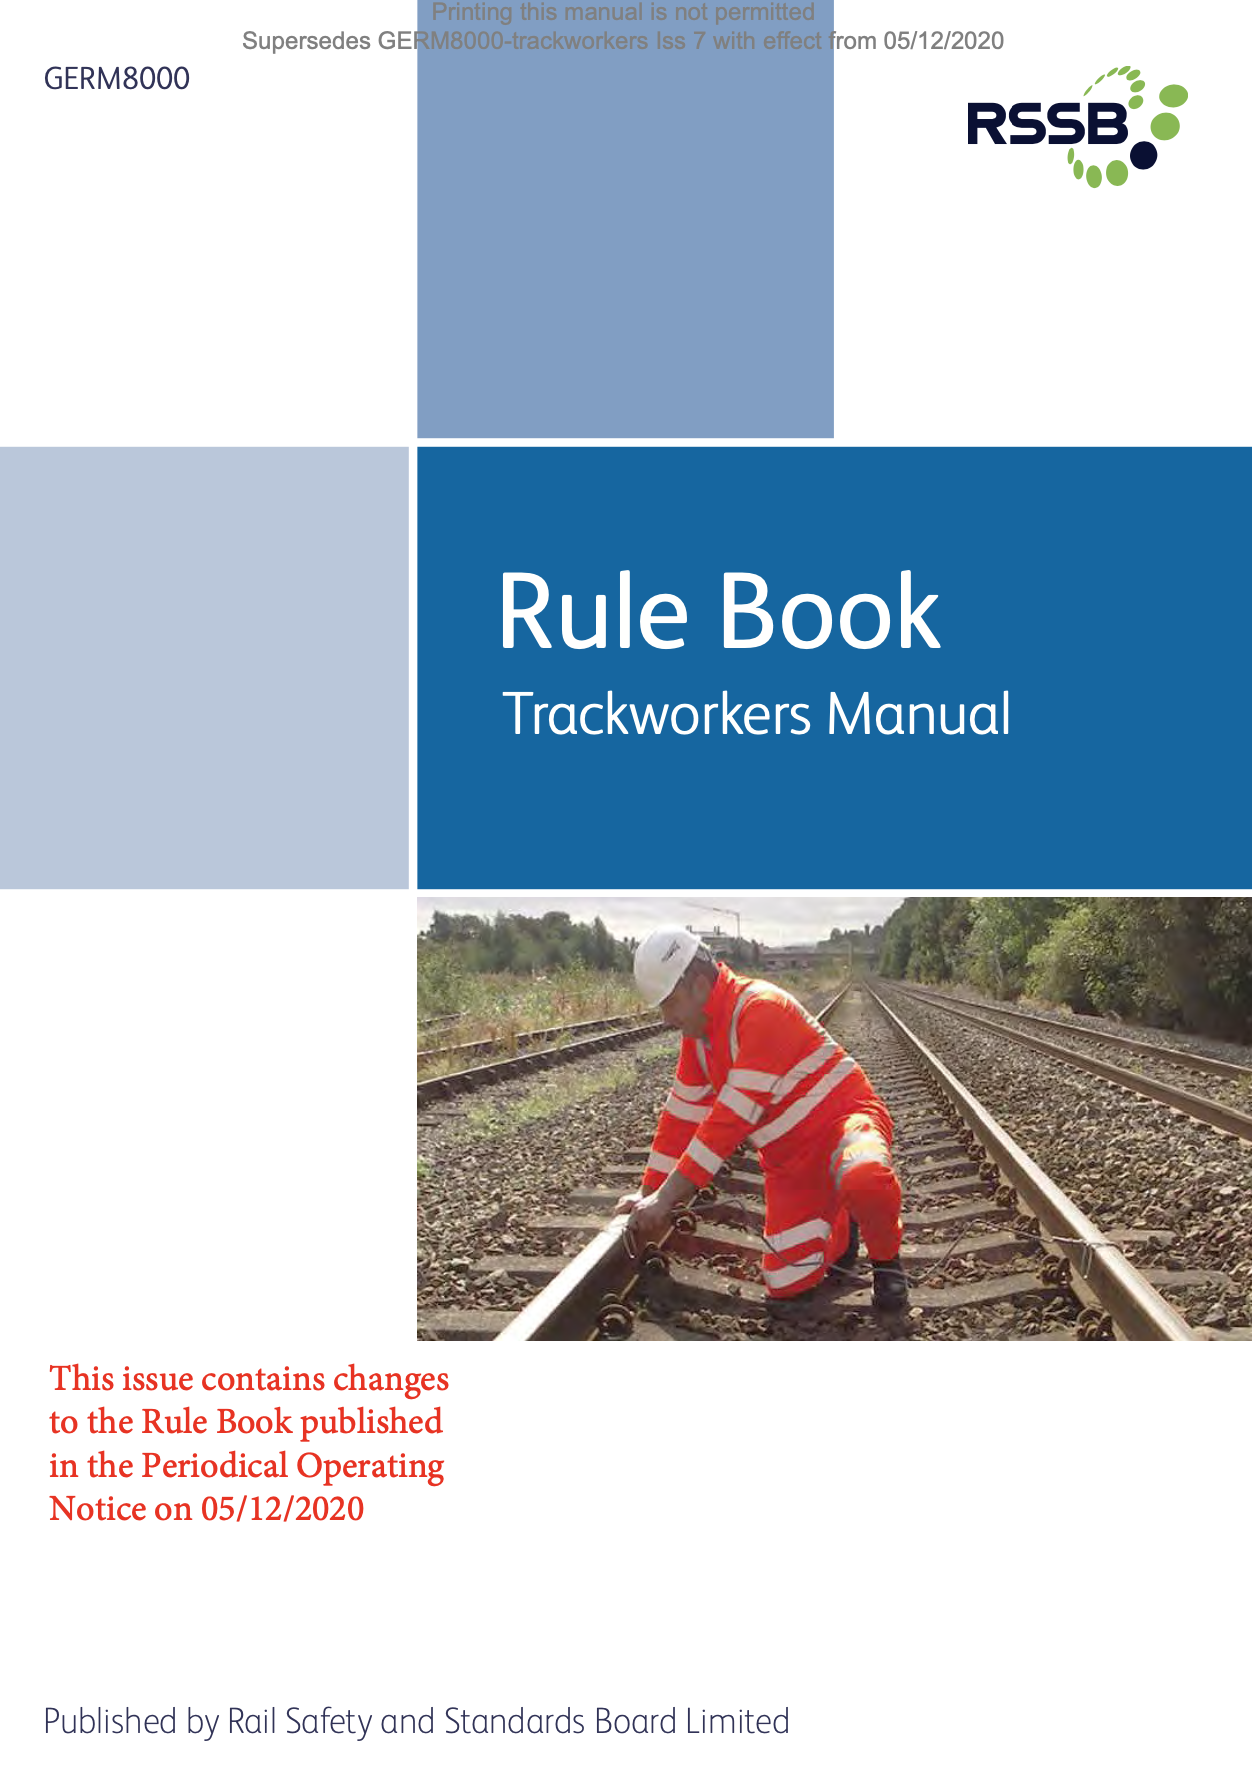 Trackworkers Manual Cover